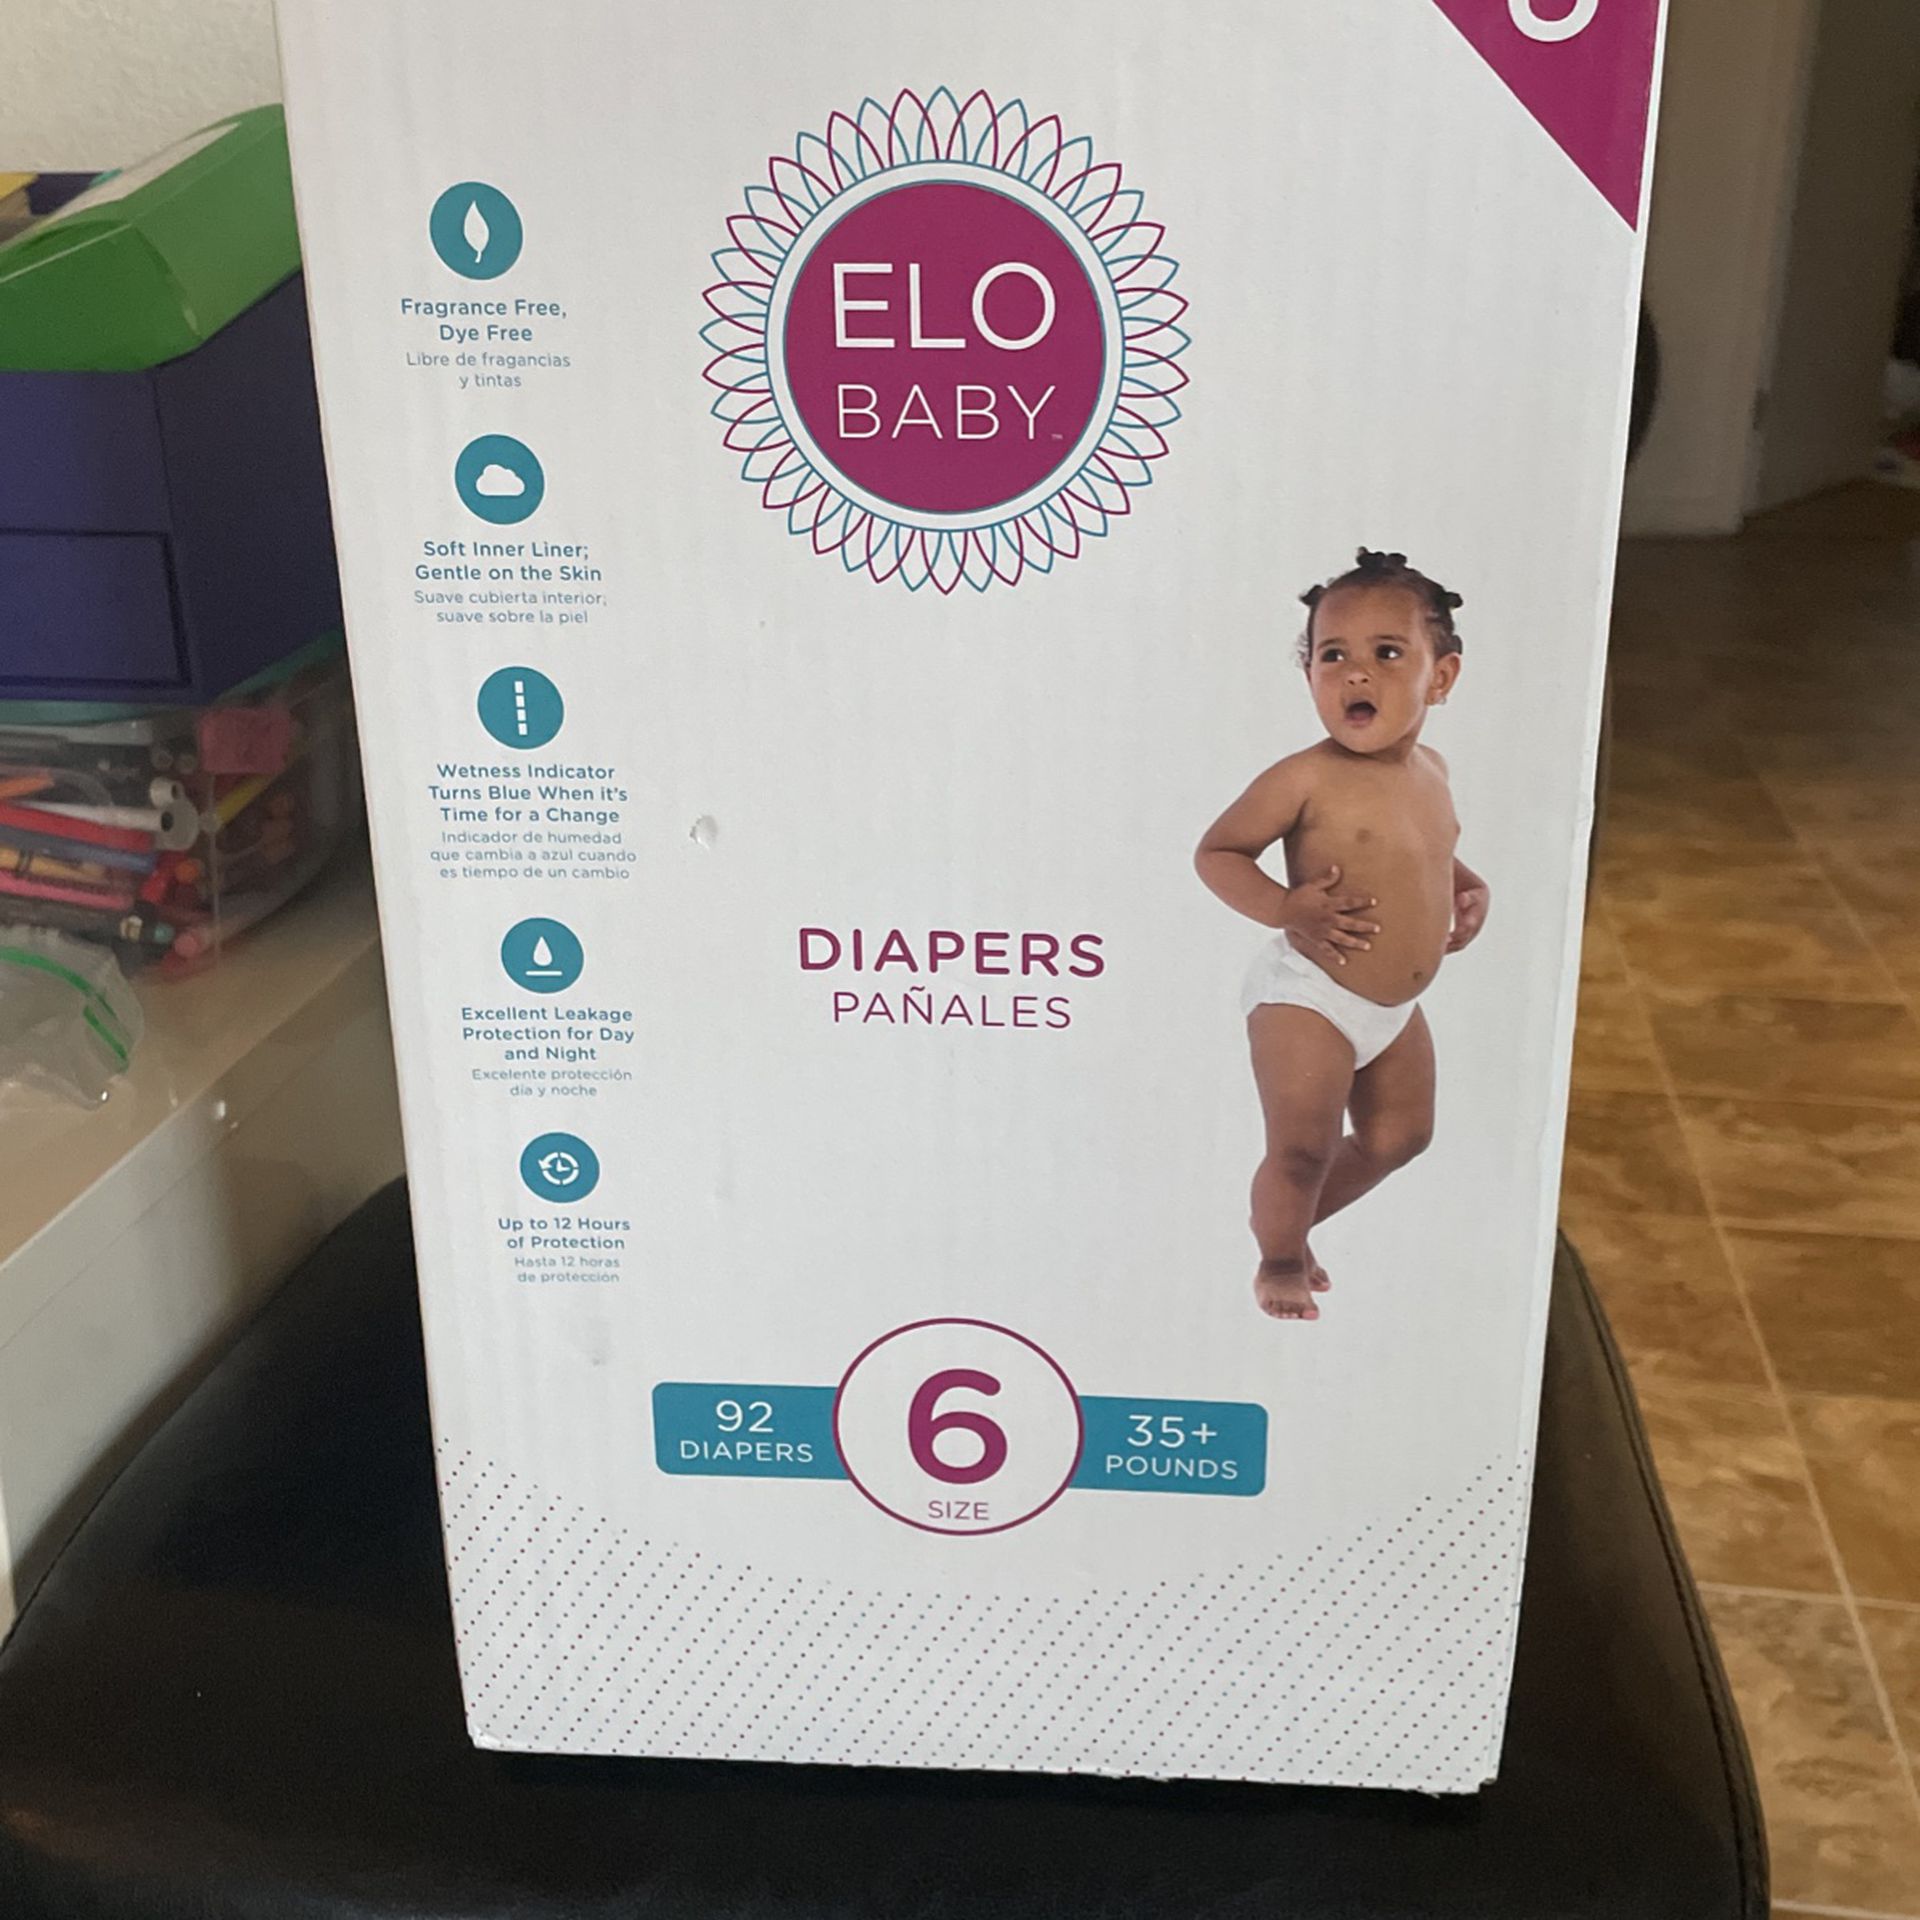 ELO BABY DIPERS